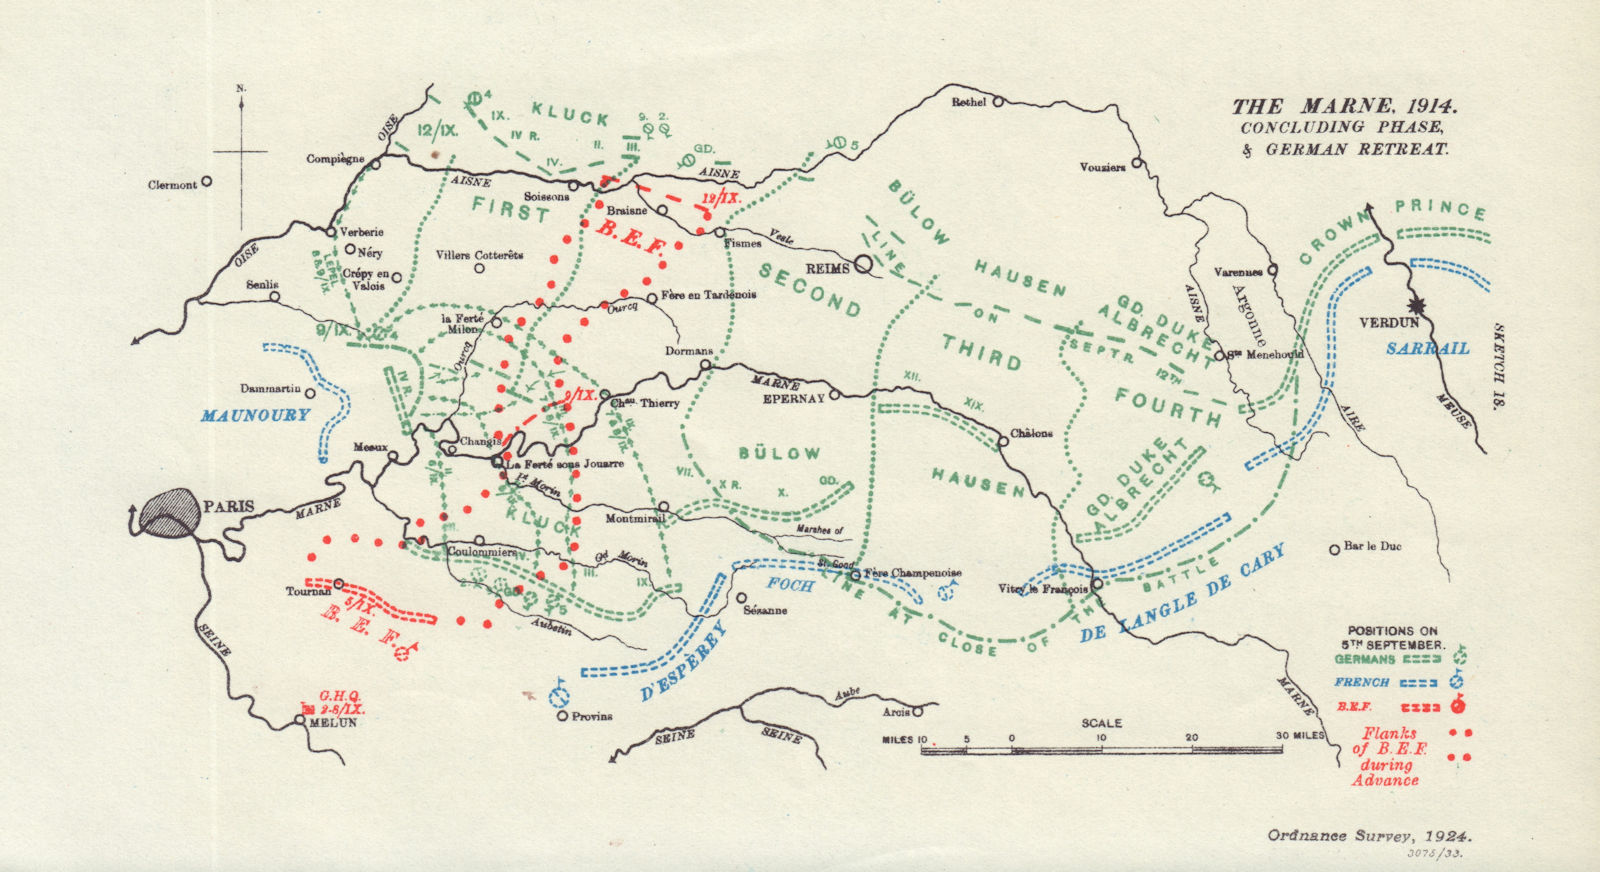 Battle of the Marne 5th Sept 1914. Concluding Phase & German Retreat 1933 map